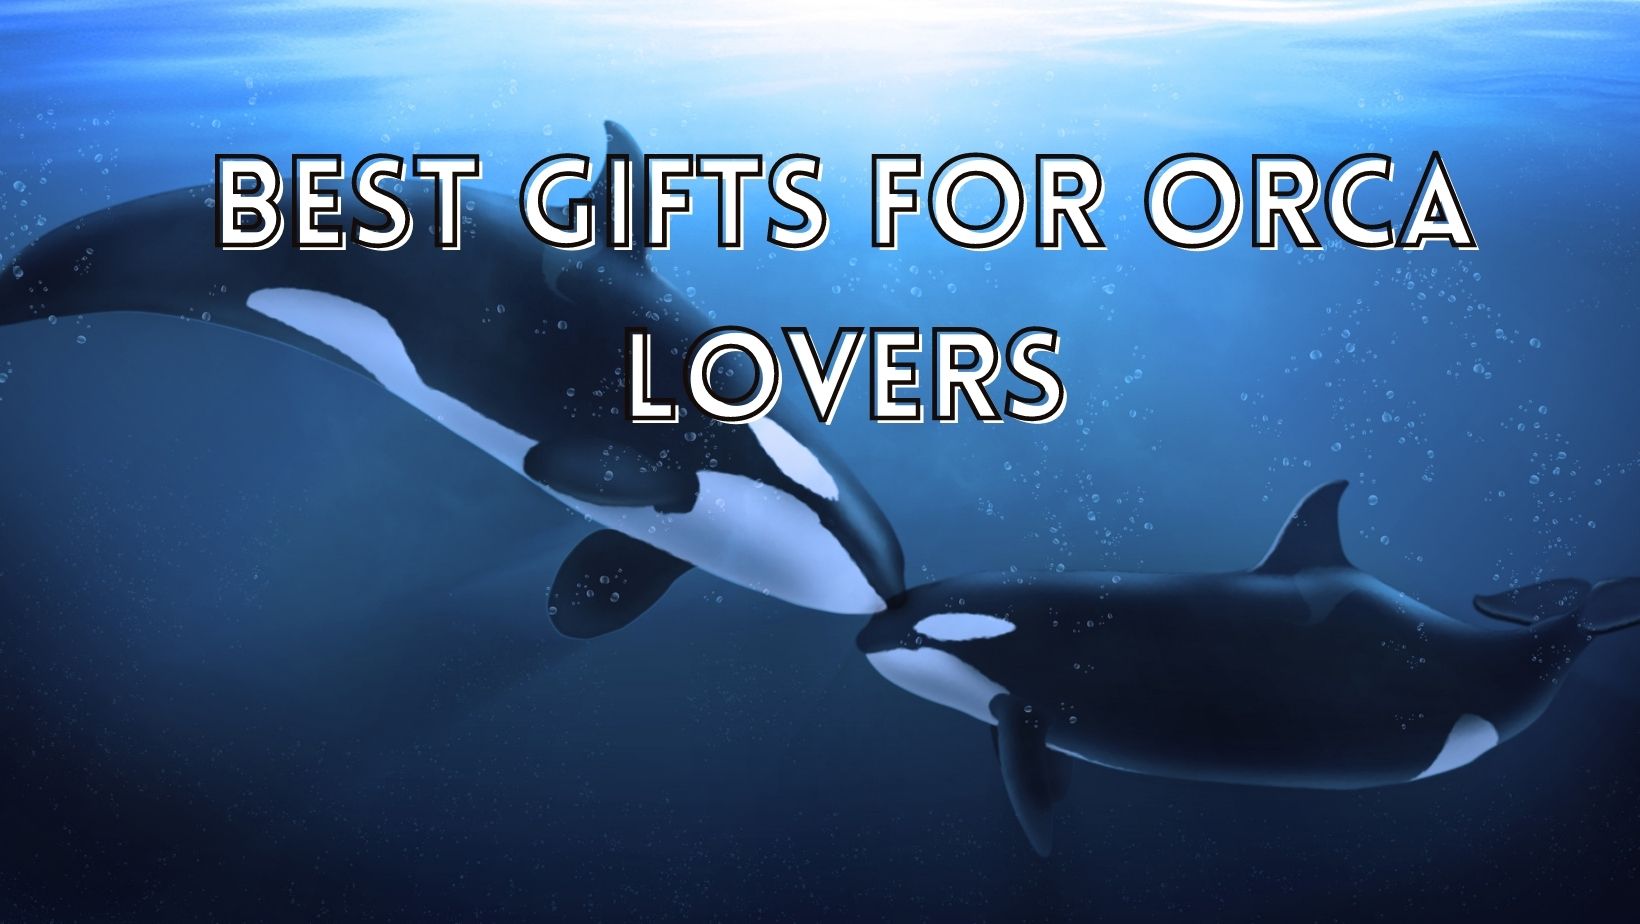 Top gifts for orca lovers